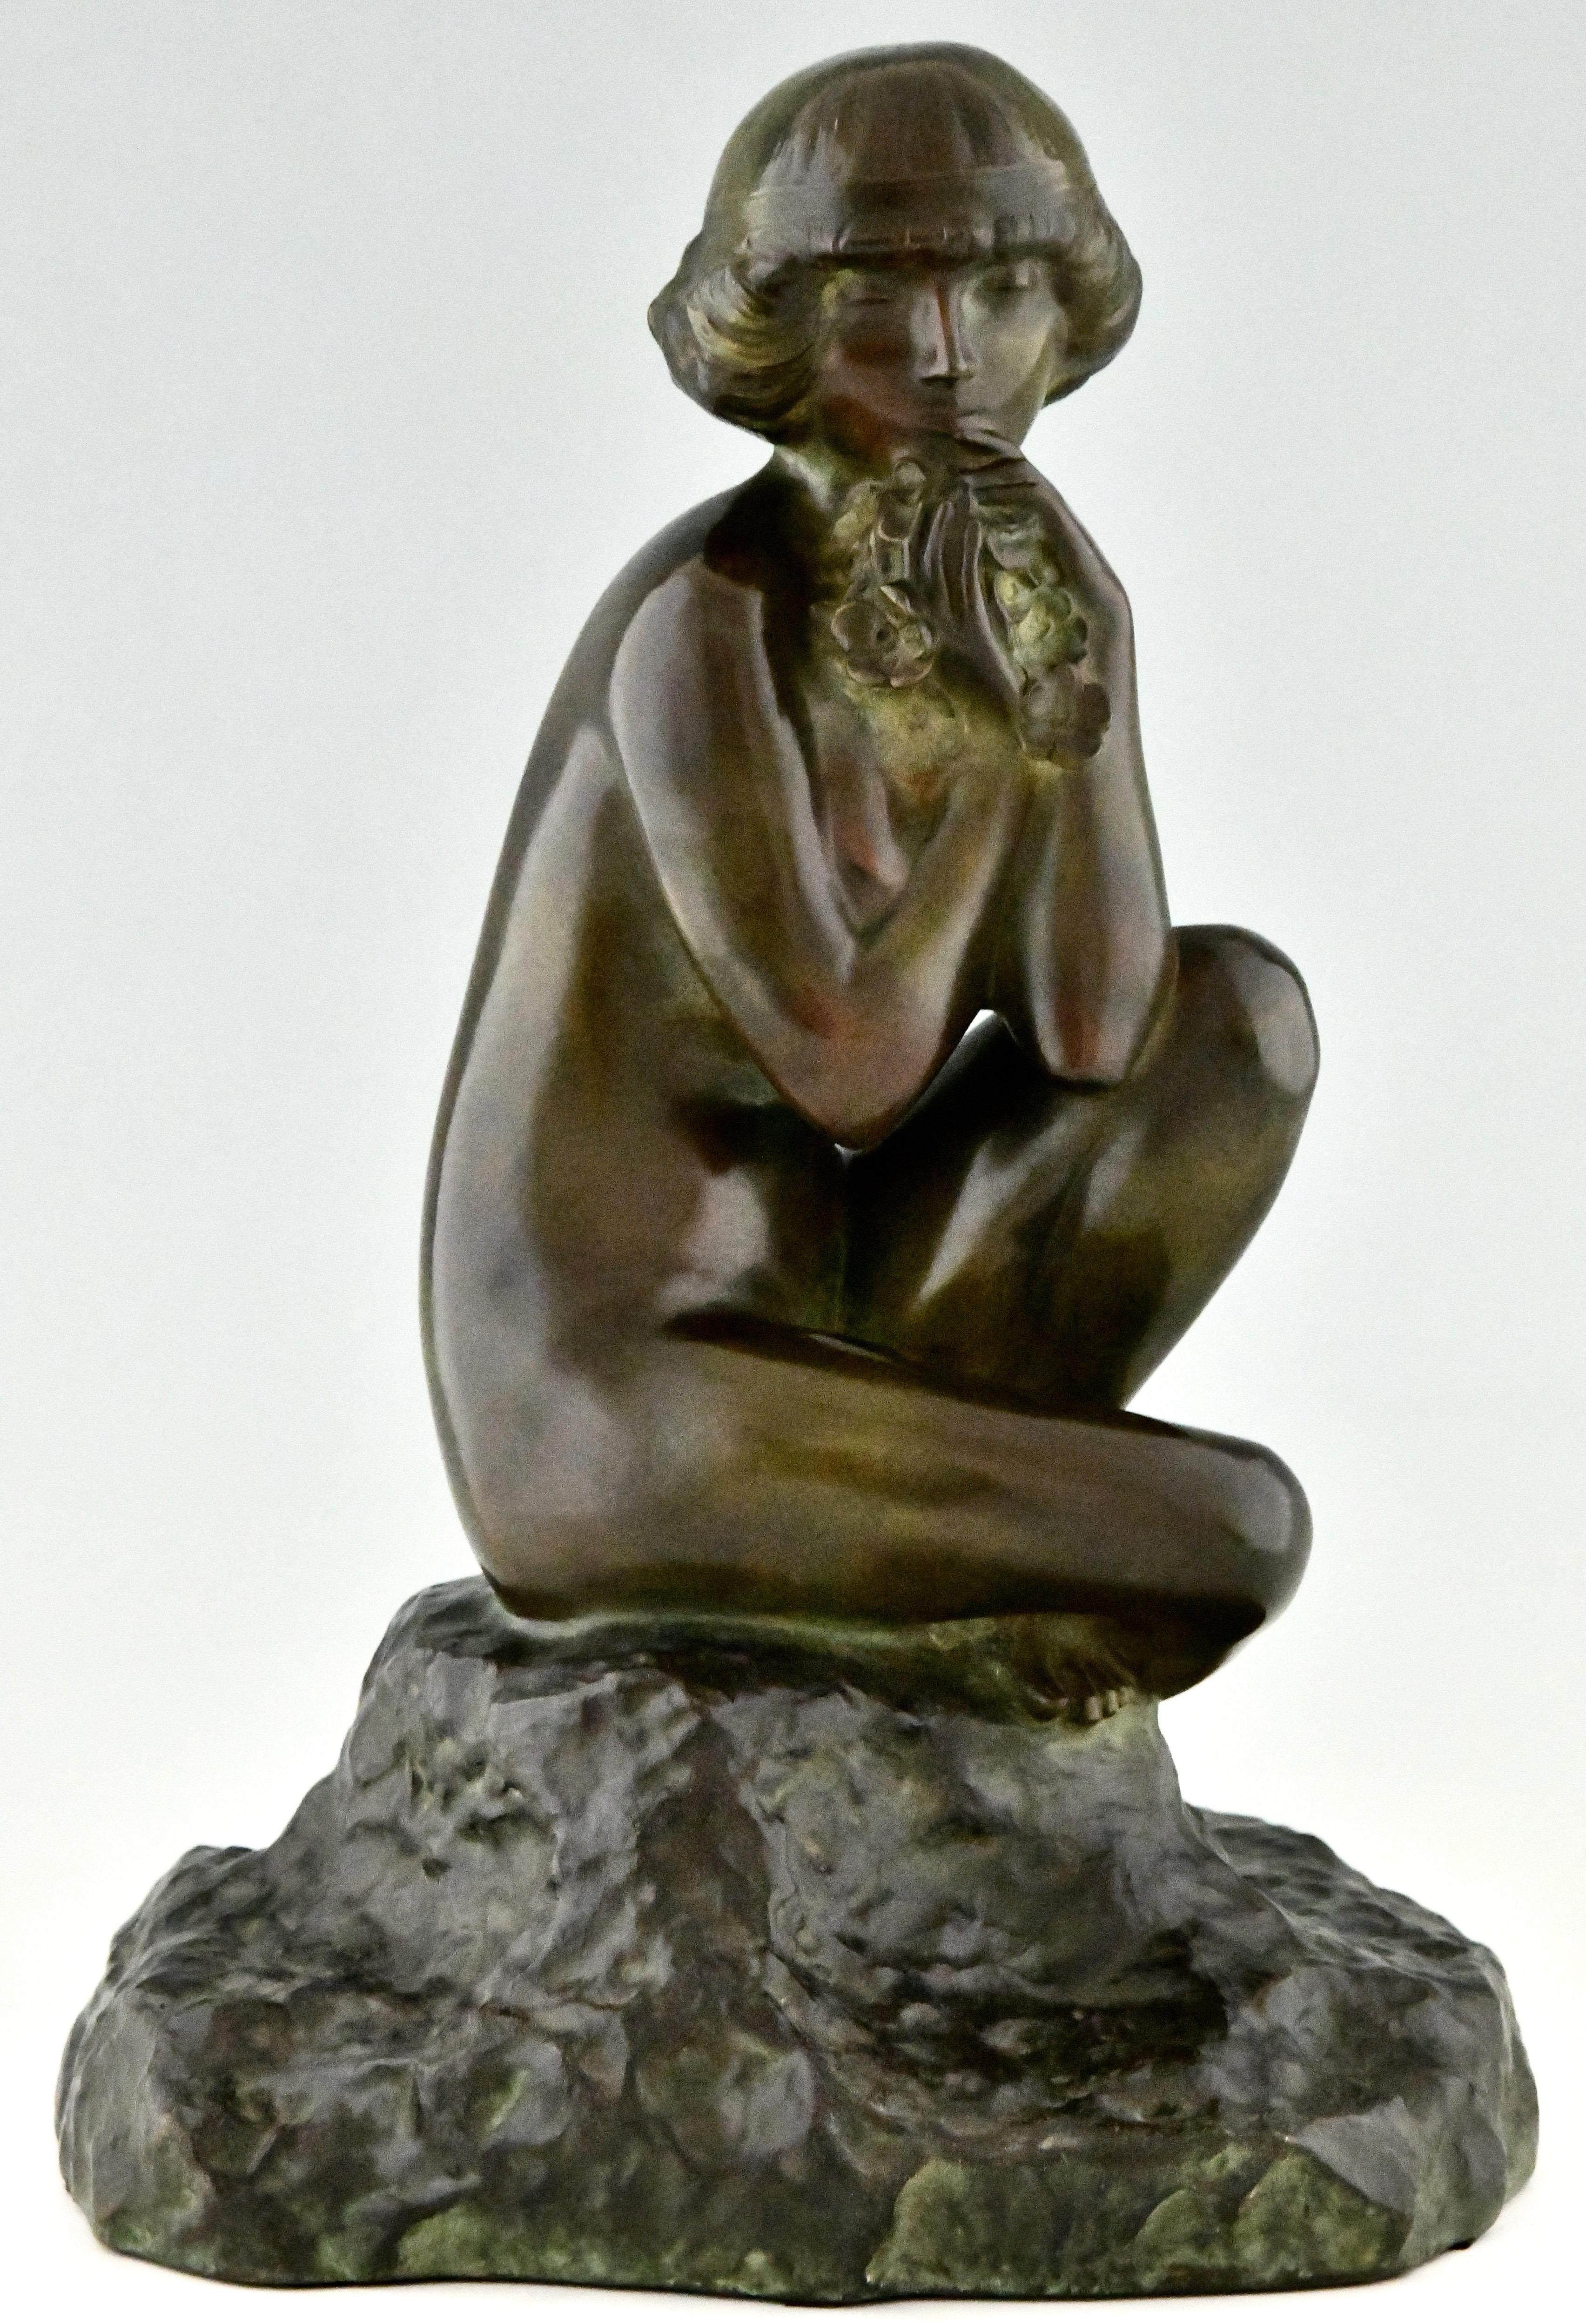 Art Deco bronze sculpture seated nude with flowers by Maxime Real del Sarte, France 1888-1954. Ca. 1920

Information about the artist:
Bronzes, sculptors and founders by H. Berman, Abage. 
The dictionary of sculptors in bronze by James Mackay.